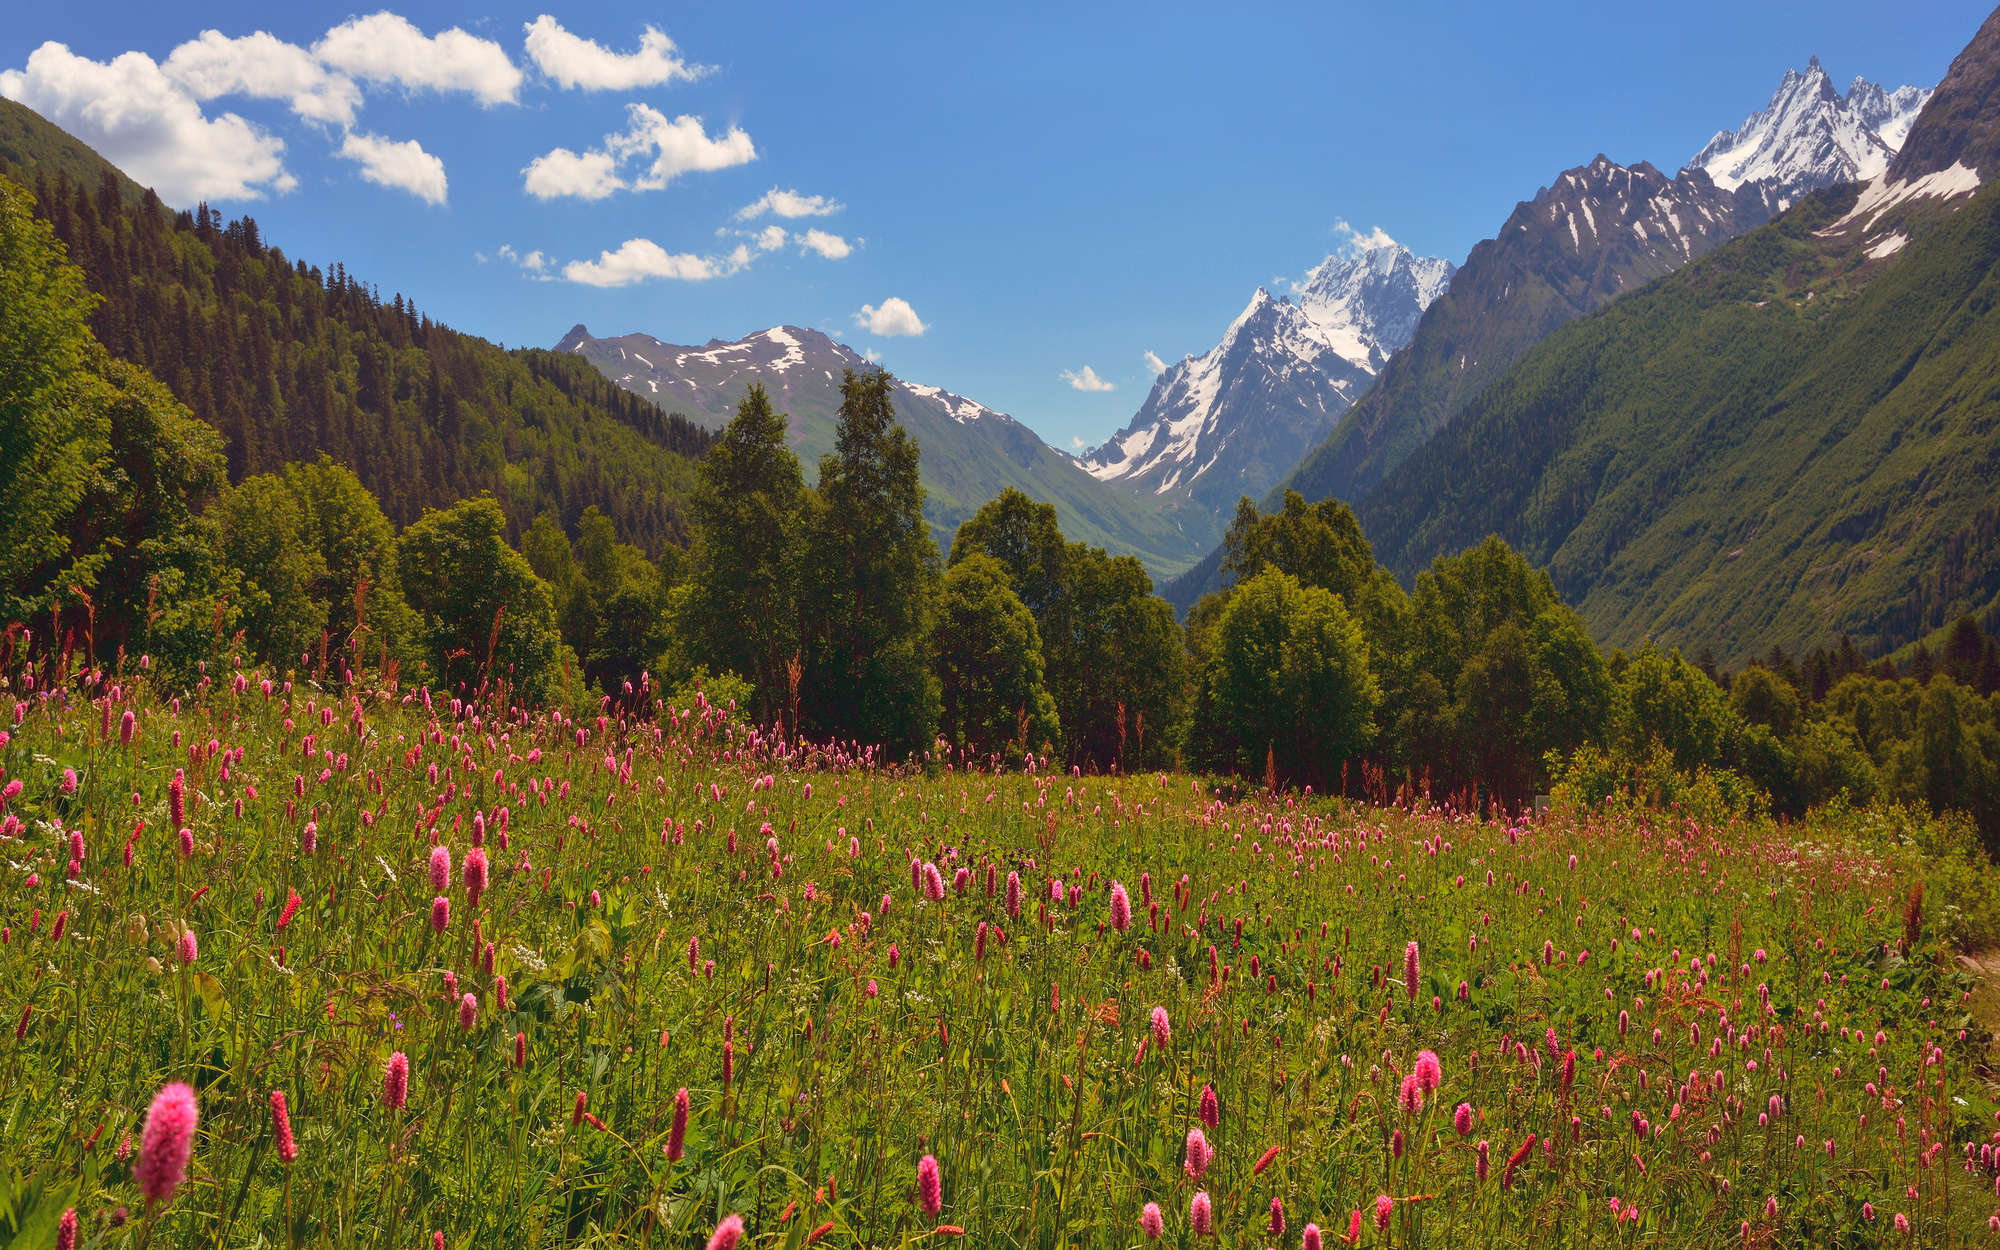             Nature Wallpaper Meadow and Mountain Landscape - Textured Non-woven
        